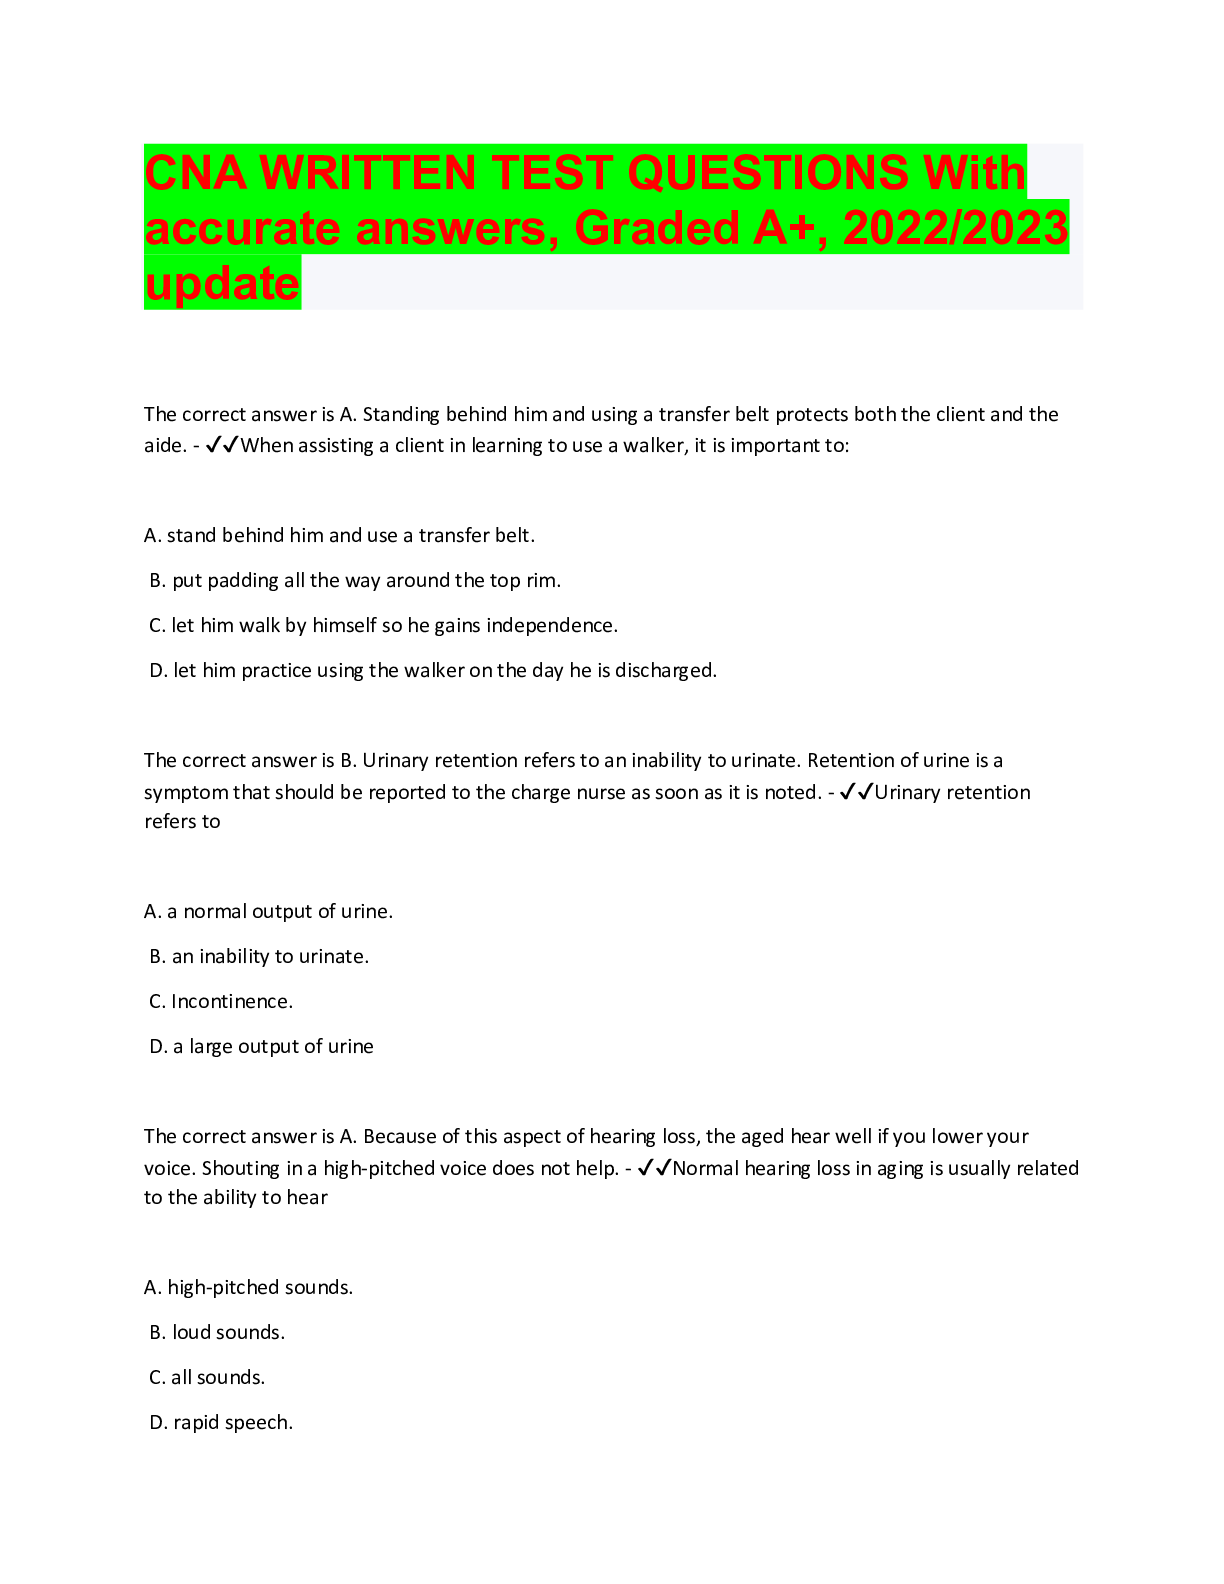 tennessee questions for cna written test